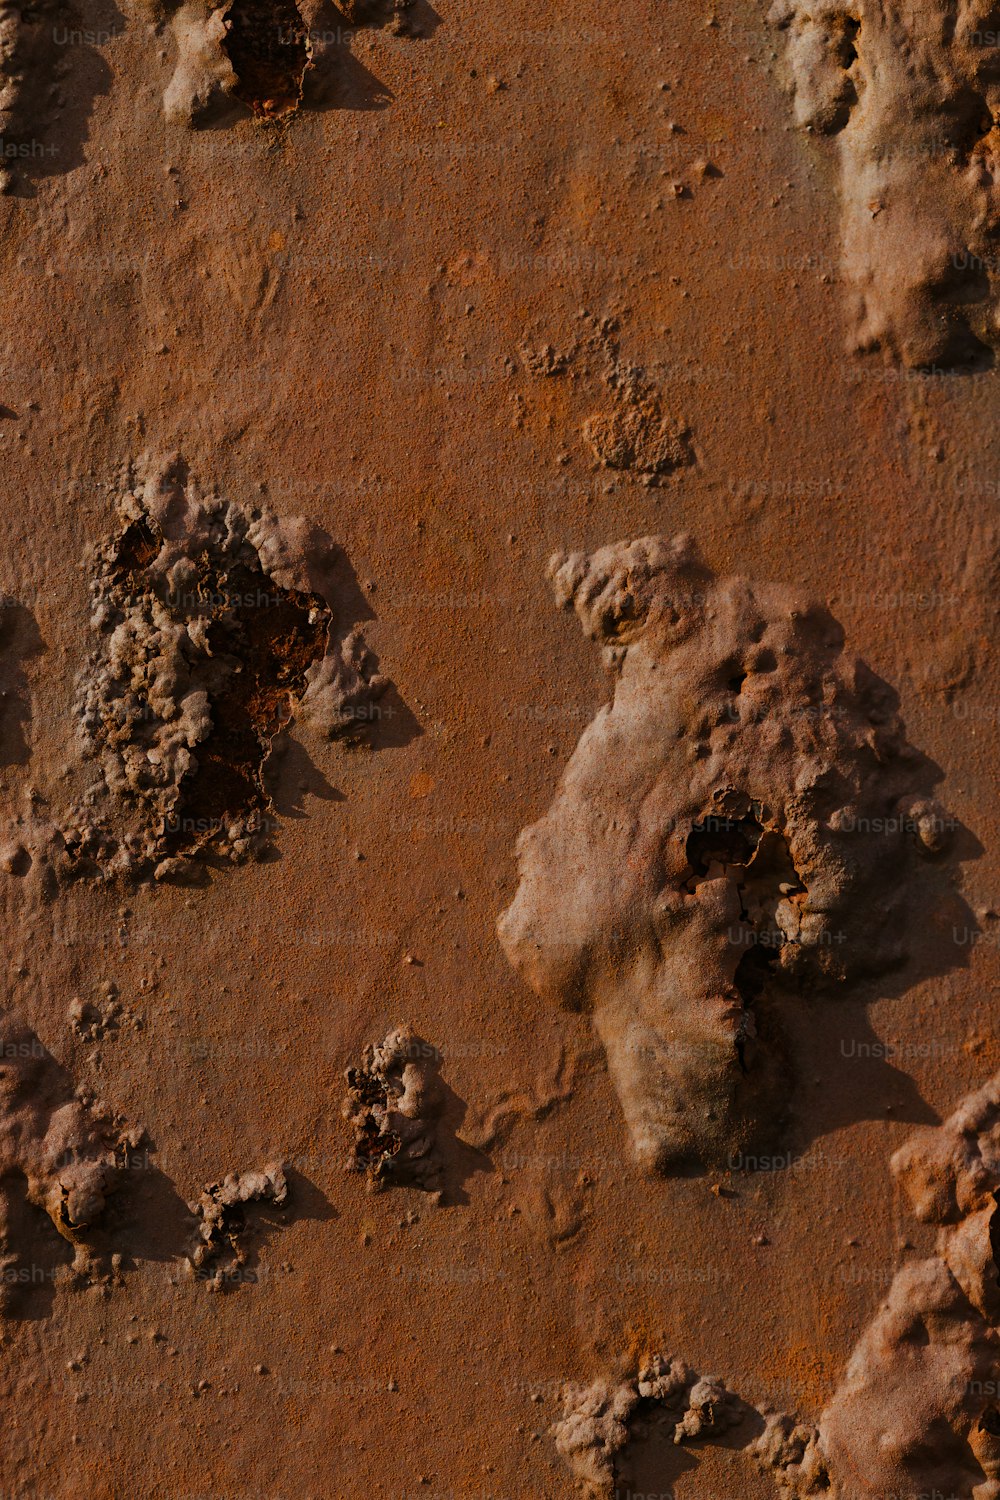 a close up of rocks and dirt on a surface